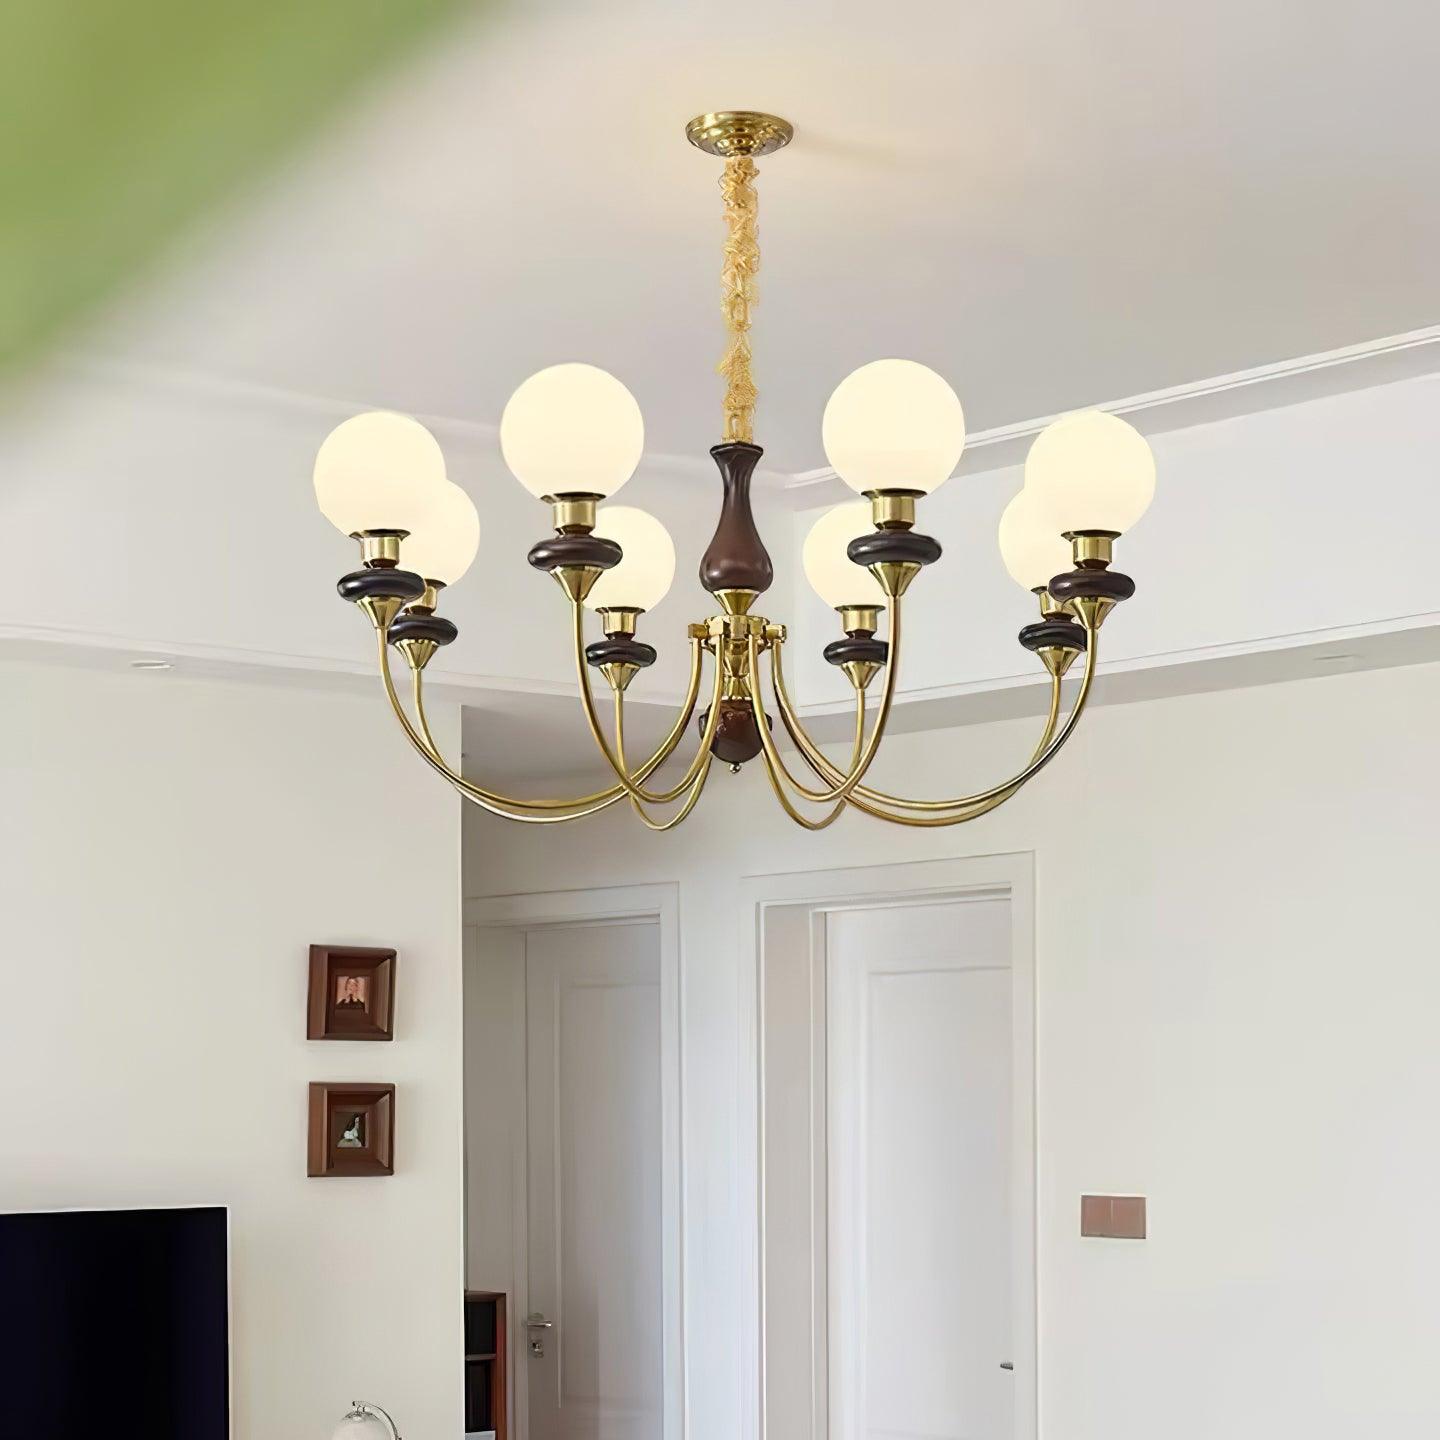 Finding the Perfect Vintage Branching Chandelier for Your Home